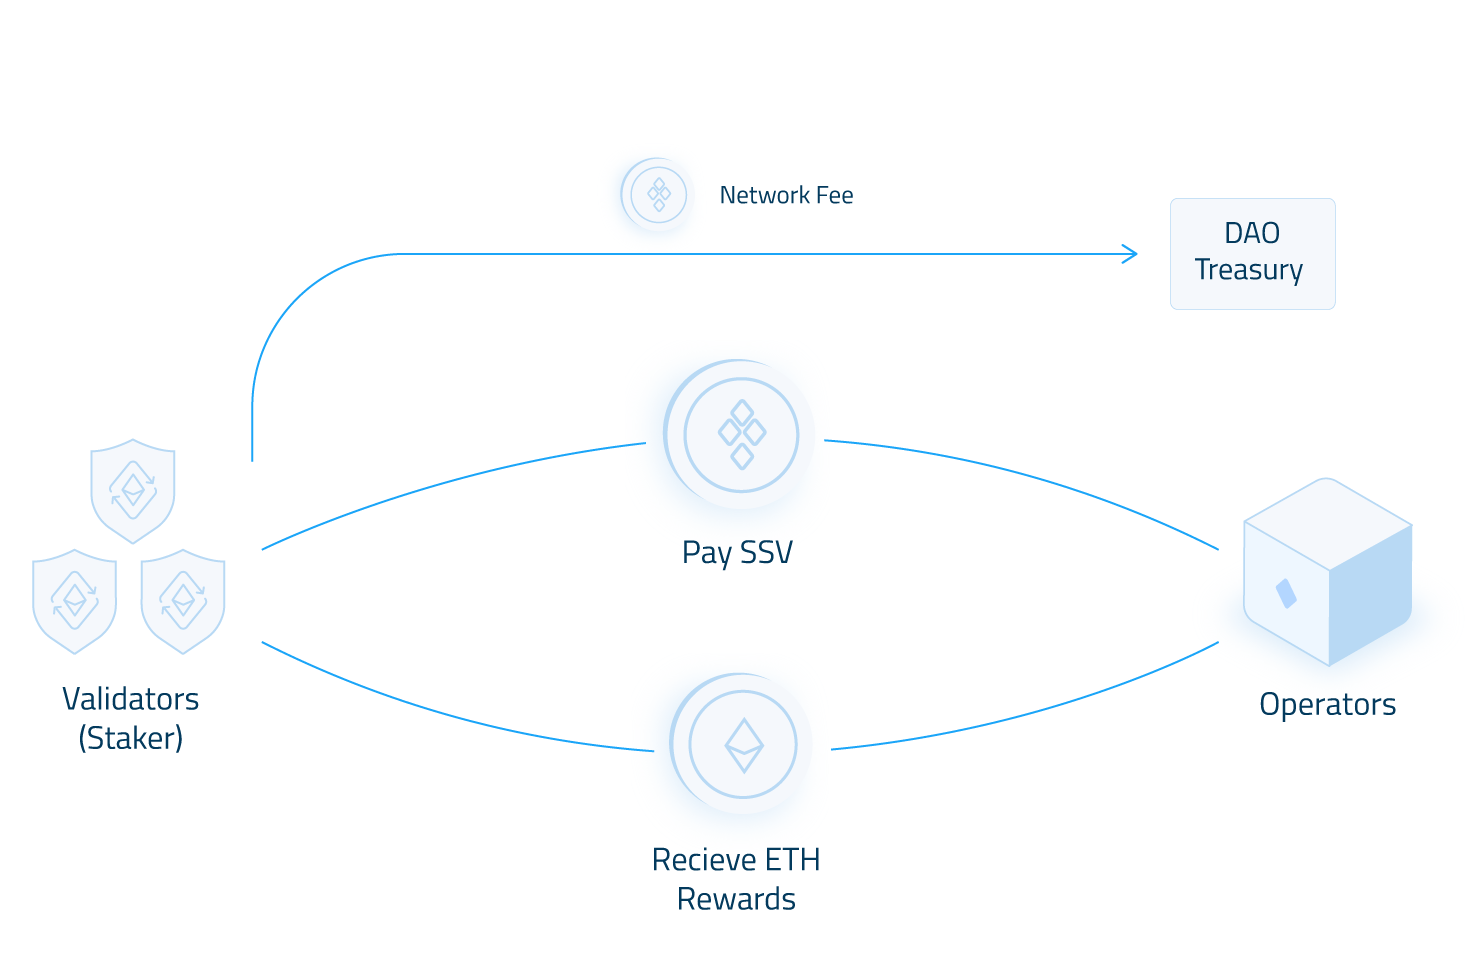 The Network Fee provides a flow of income for the DAO.